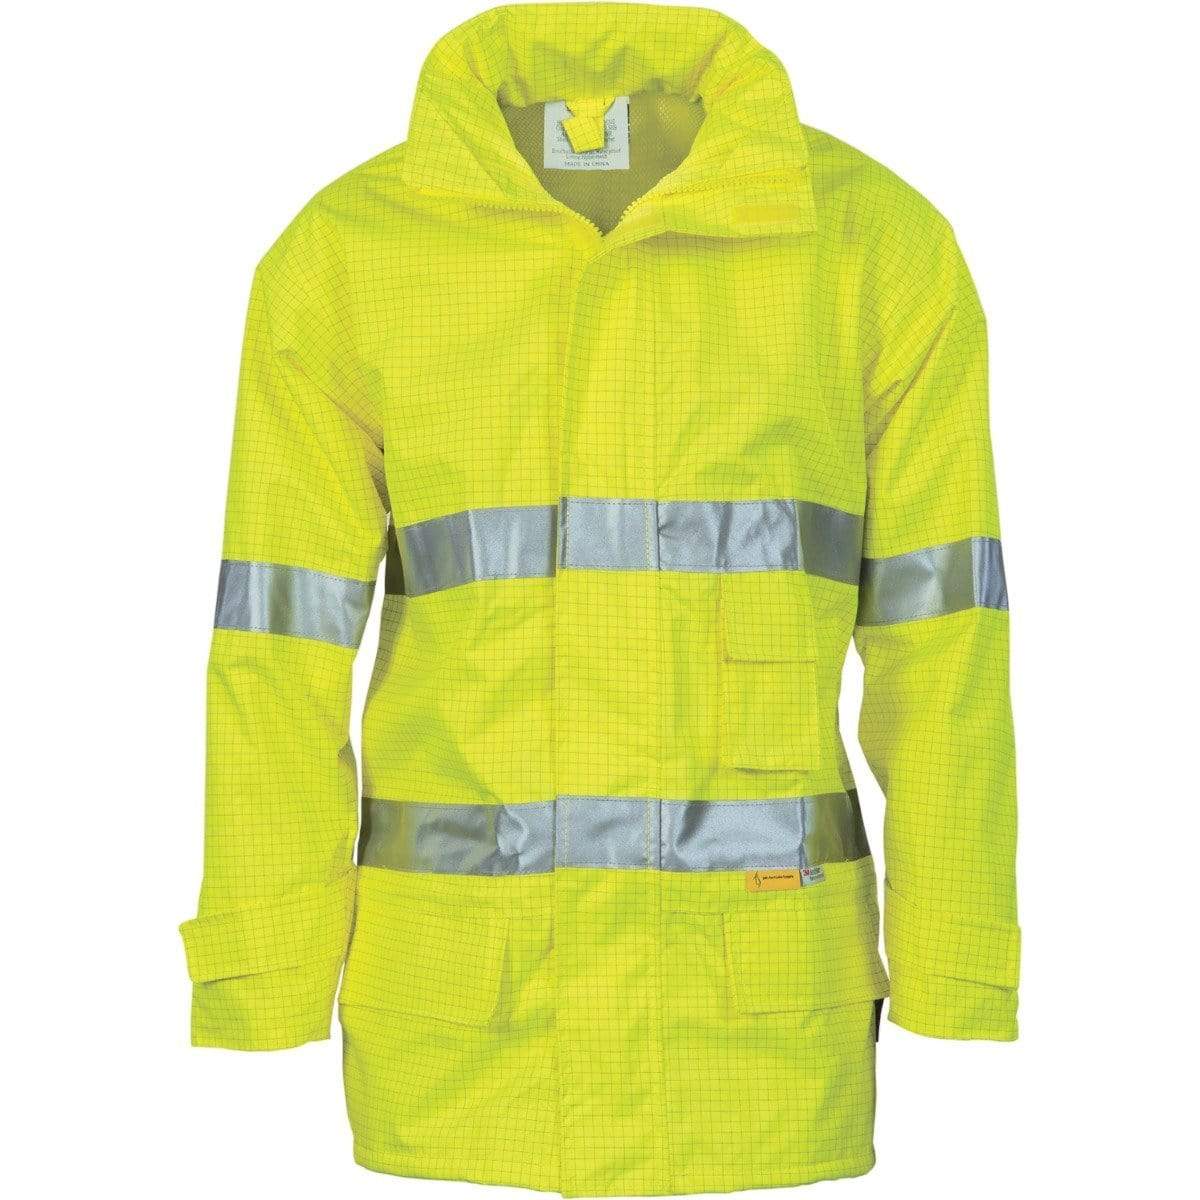 Dnc Workwear Hi-vis Breathable Anti-static Jacket With 3m Reflective Tape - 3875 Work Wear DNC Workwear Yellow S 